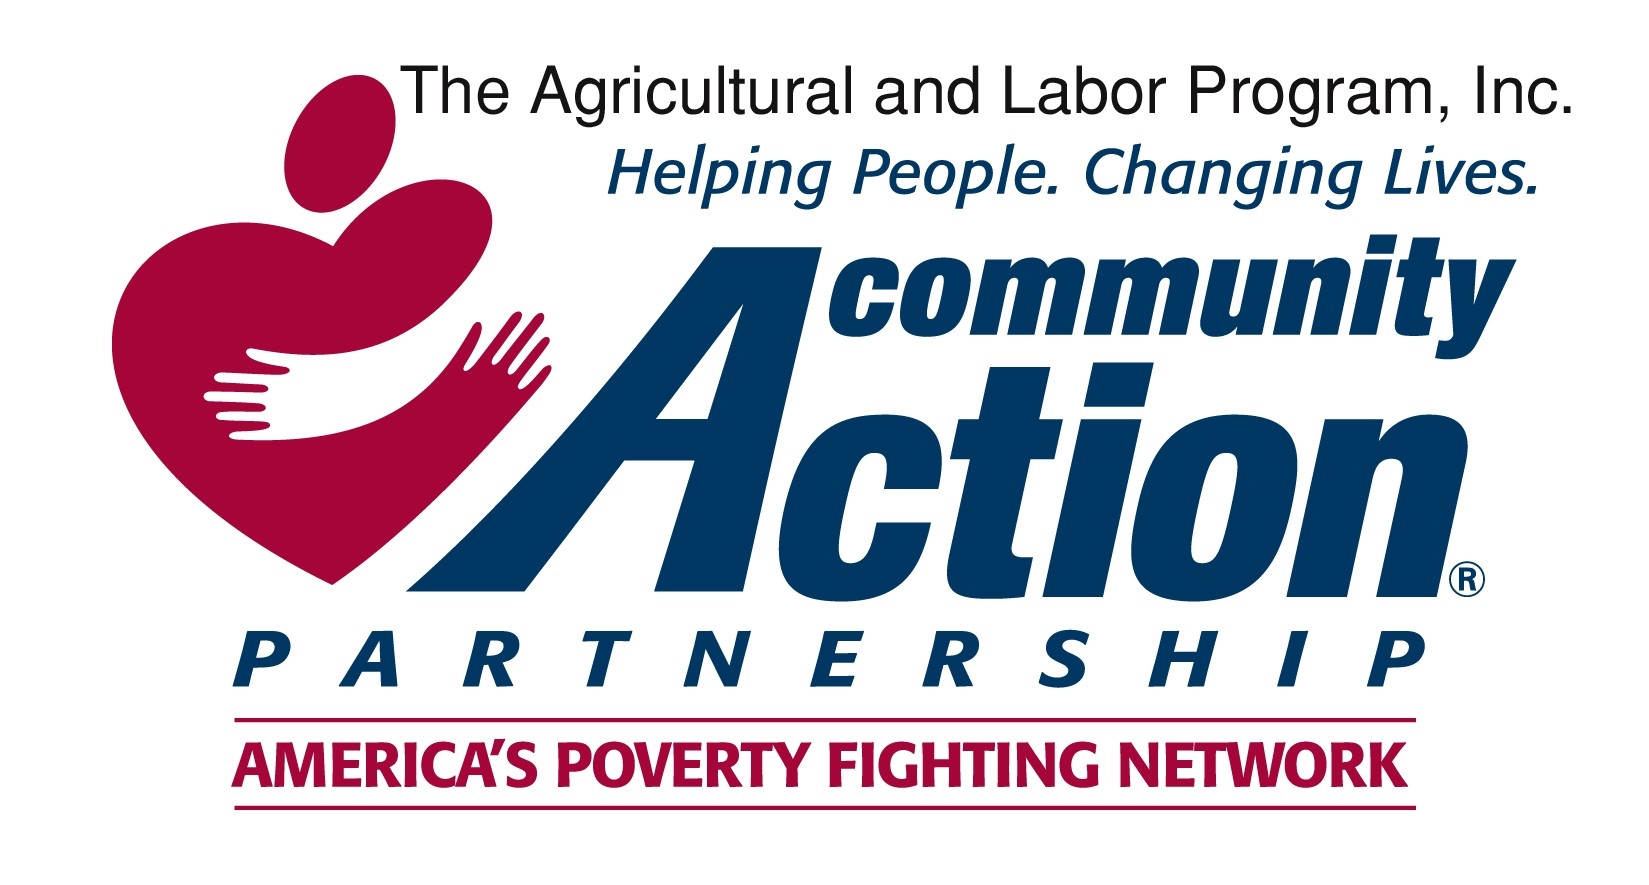 The Agricultural and Labor Program, Inc. logo